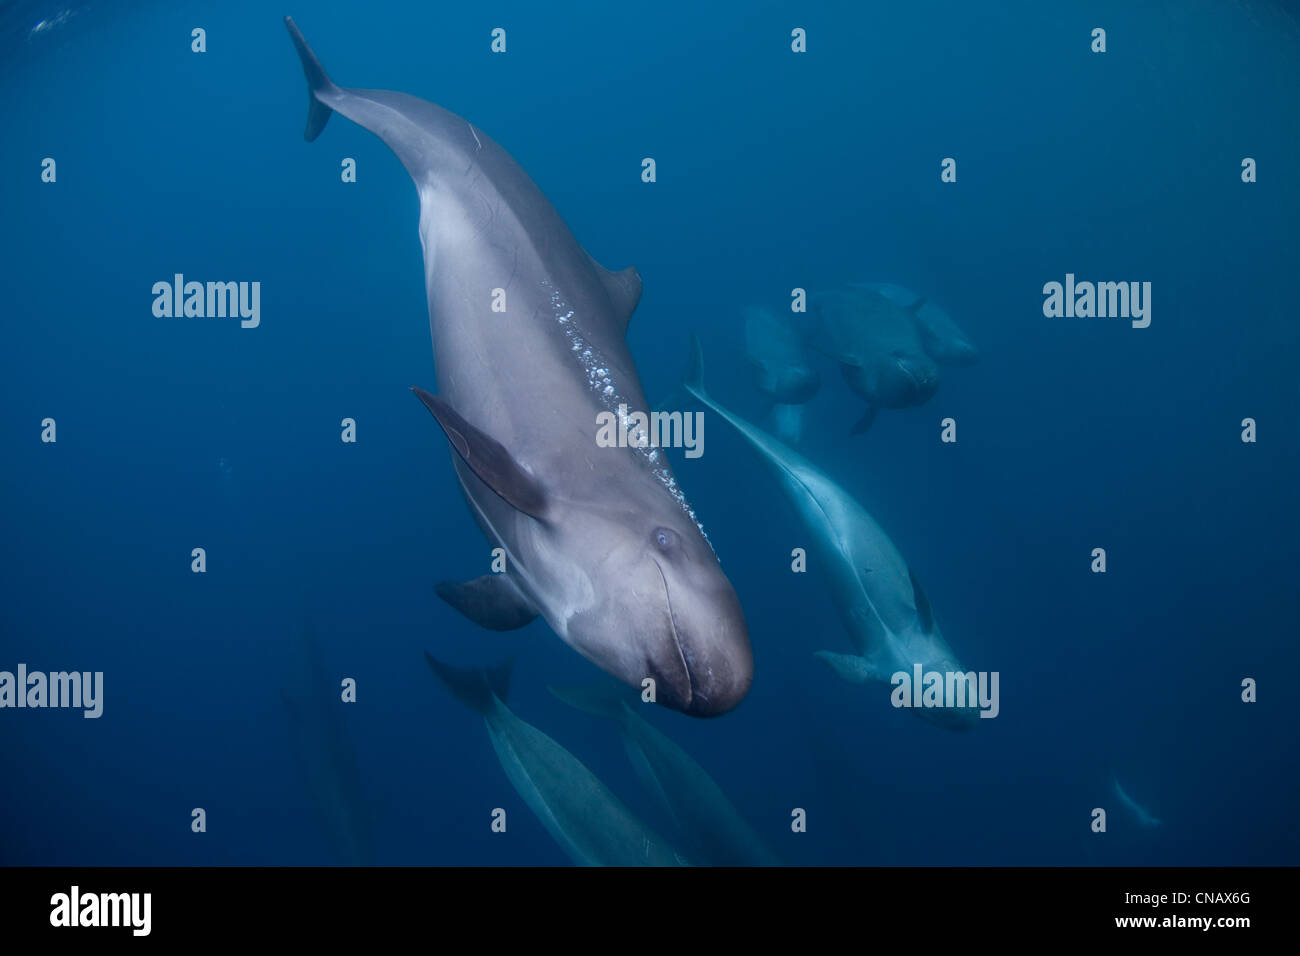 False killer whales swimming together Stock Photo